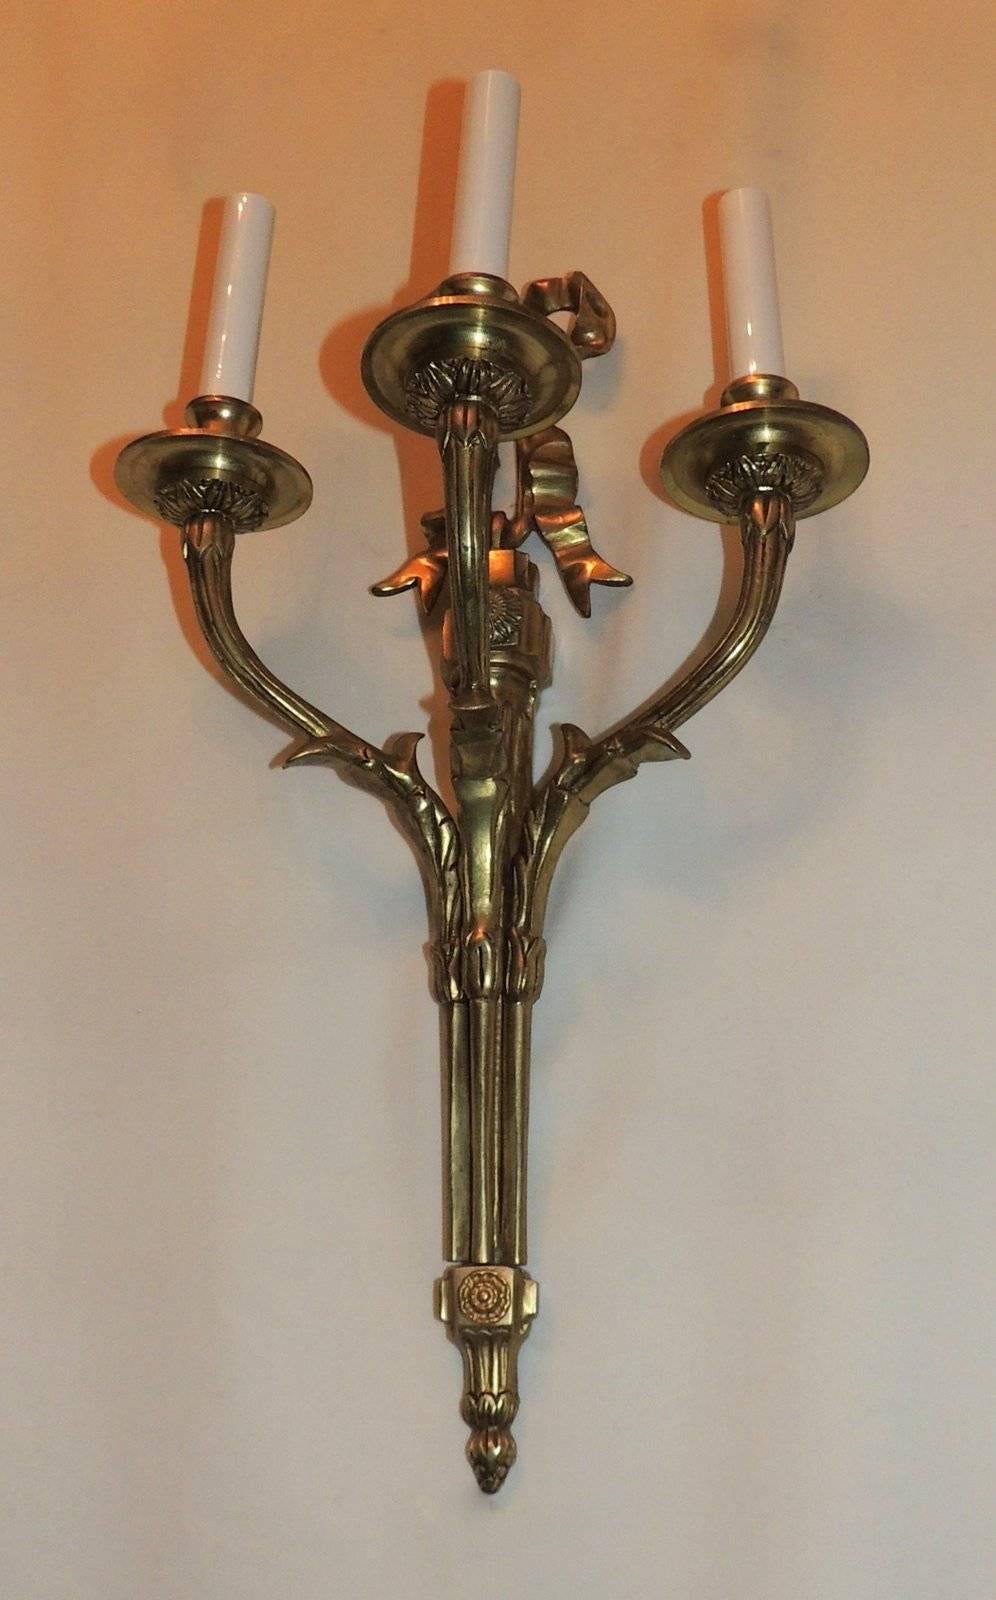 Elegant pair of gilt bronze three-arm French sconces with bow top and rosette detail. The three arms are decorated with filigree detail.

Measures: 21